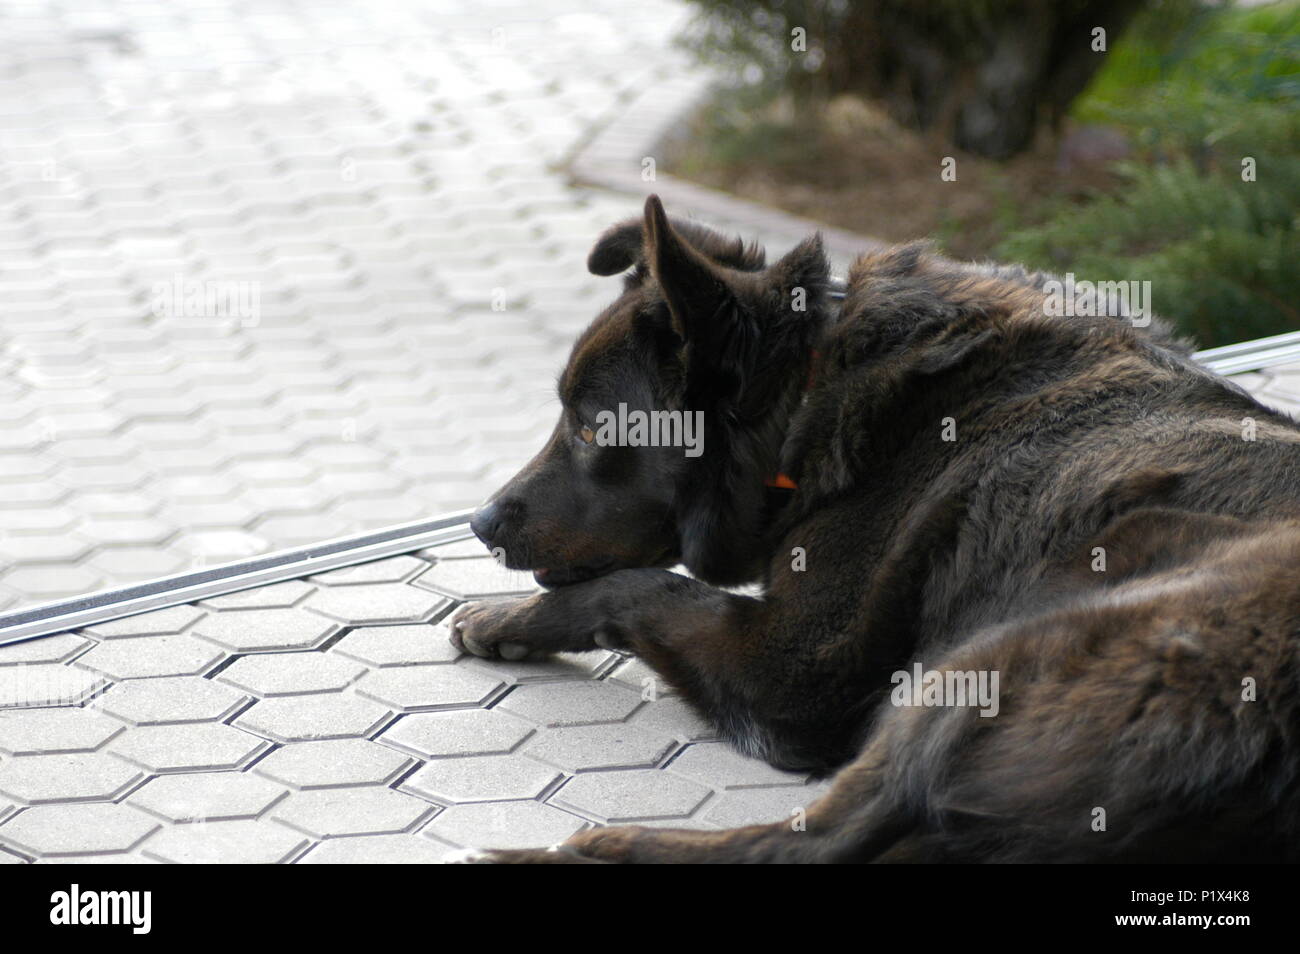 Black dog with a pensive look Stock Photo